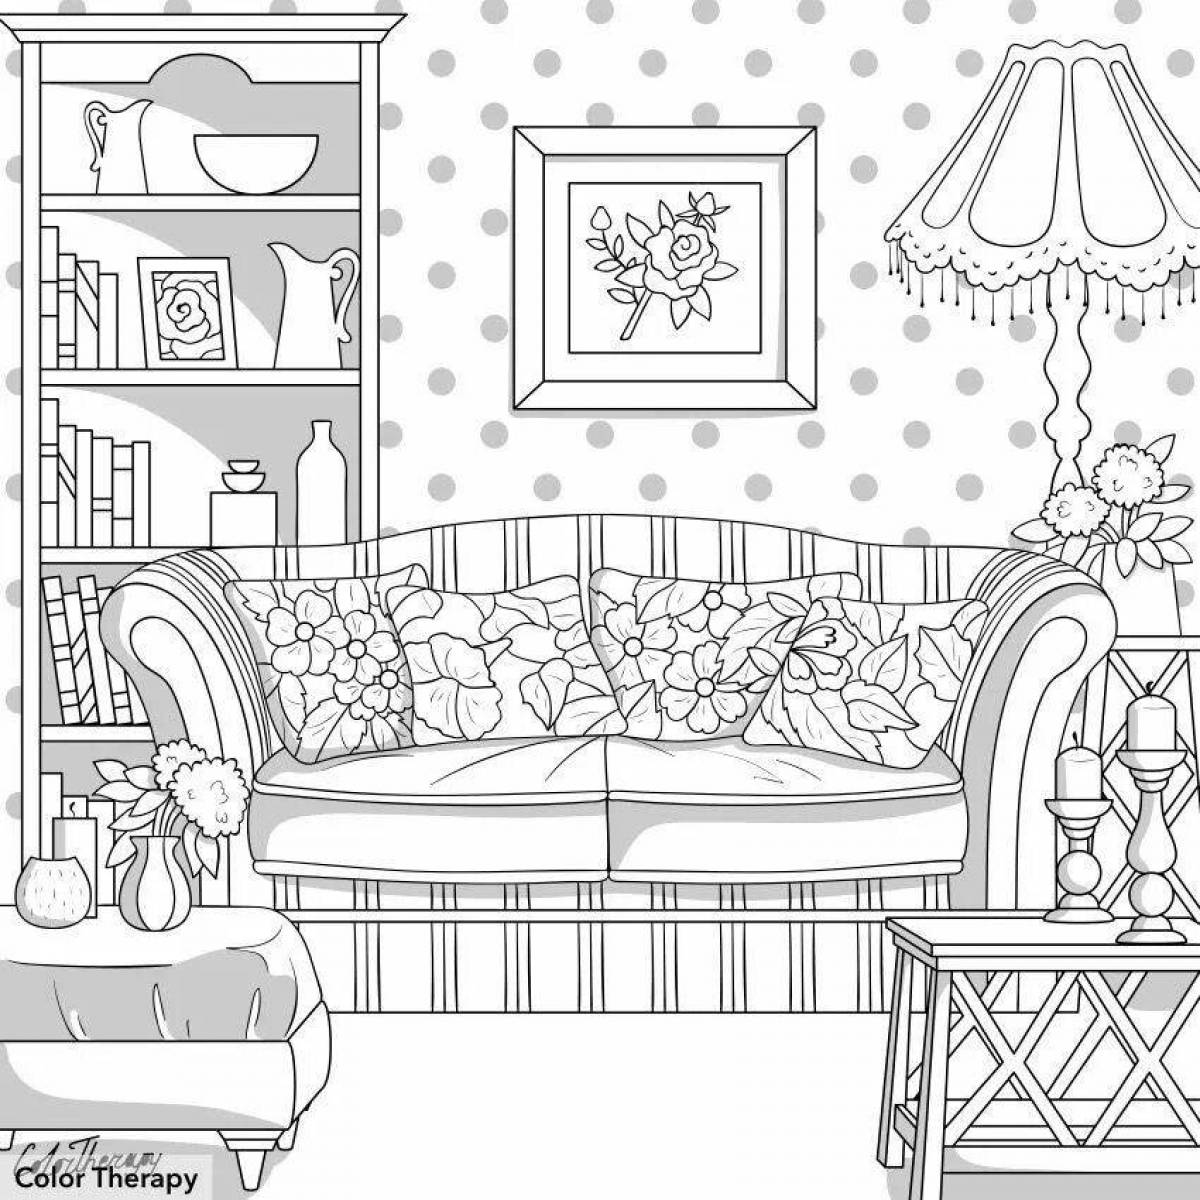 Magic girl's room coloring page